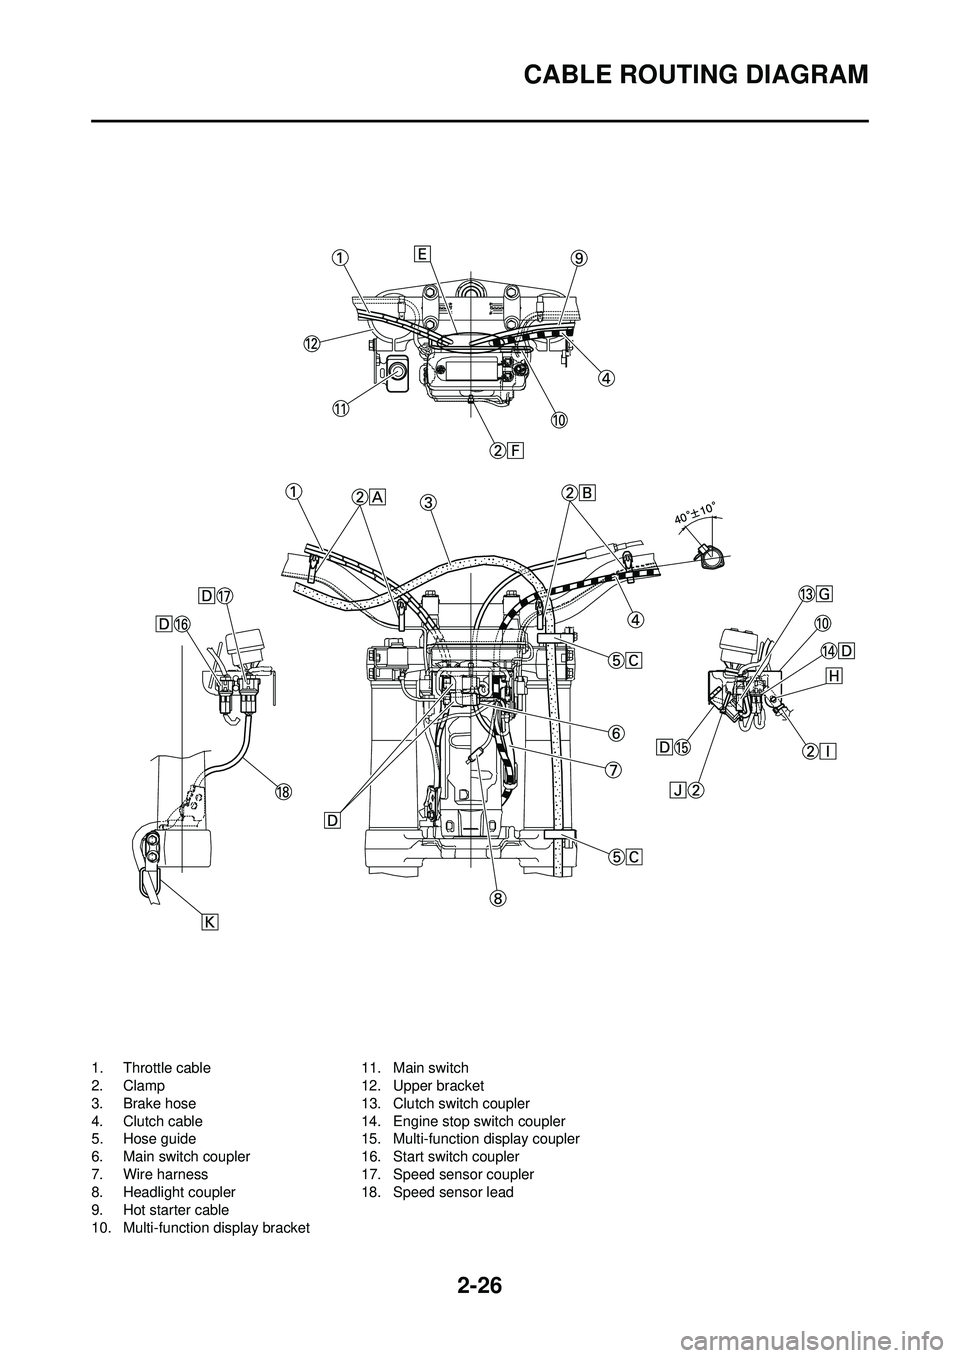 YAMAHA WR 250F 2009  Owners Manual 2-26
CABLE ROUTING DIAGRAM
1. Throttle cable
2. Clamp
3. Brake hose
4. Clutch cable
5. Hose guide
6. Main switch coupler
7. Wire harness
8. Headlight coupler
9. Hot starter cable
10. Multi-function di